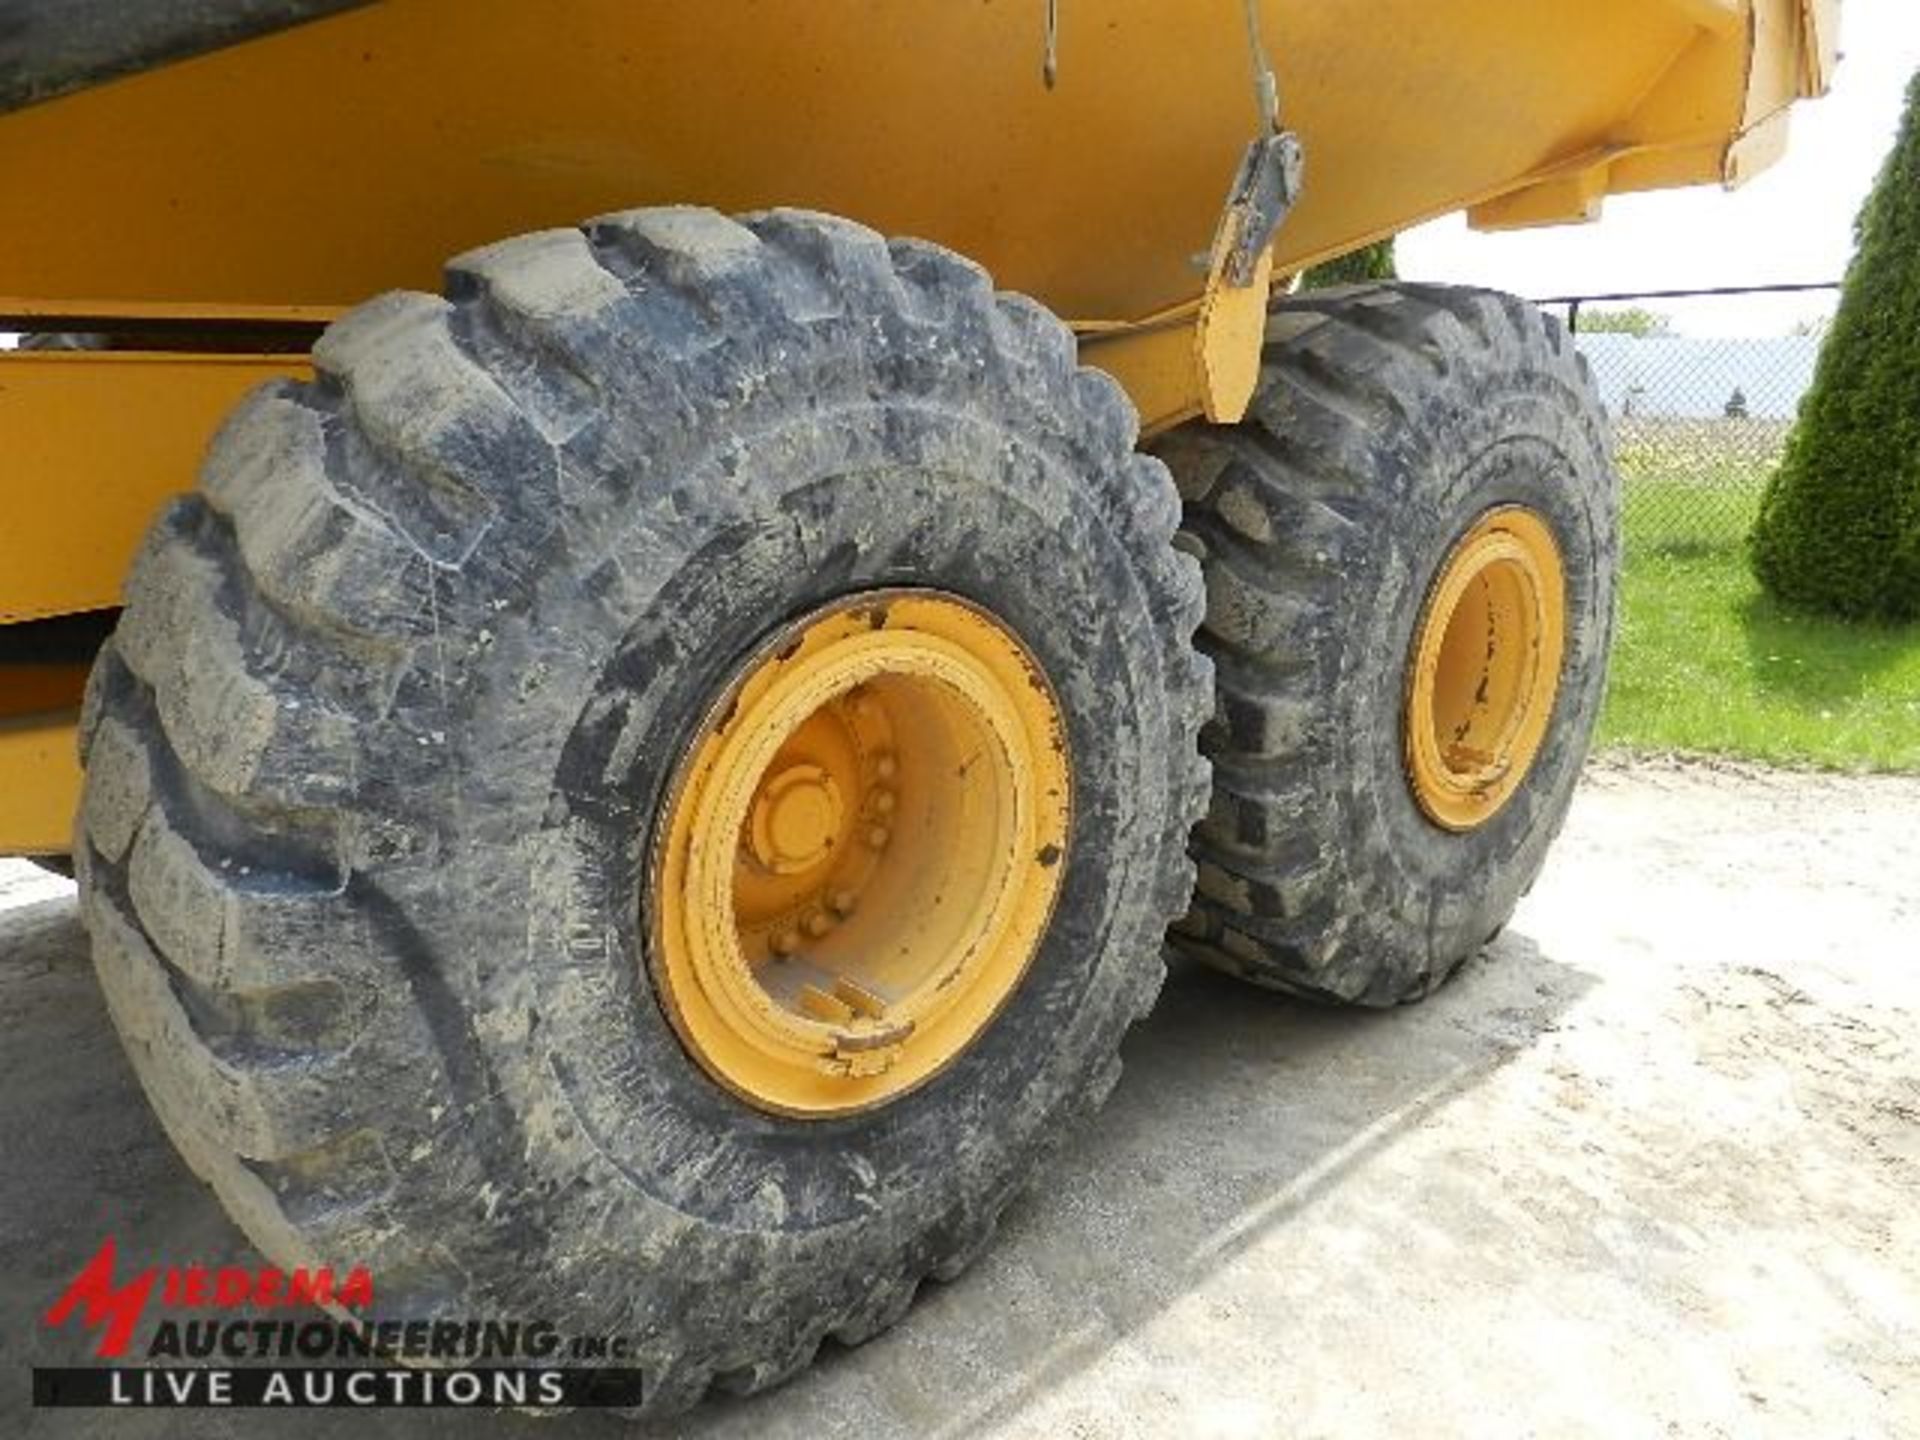 2012 VOLVO A40F ARTICULATED OFF ROAD DUMP TRUCK, 2,286 HOURS SHOWING, WITH TAILGATE, HEATED BOX, - Image 12 of 18